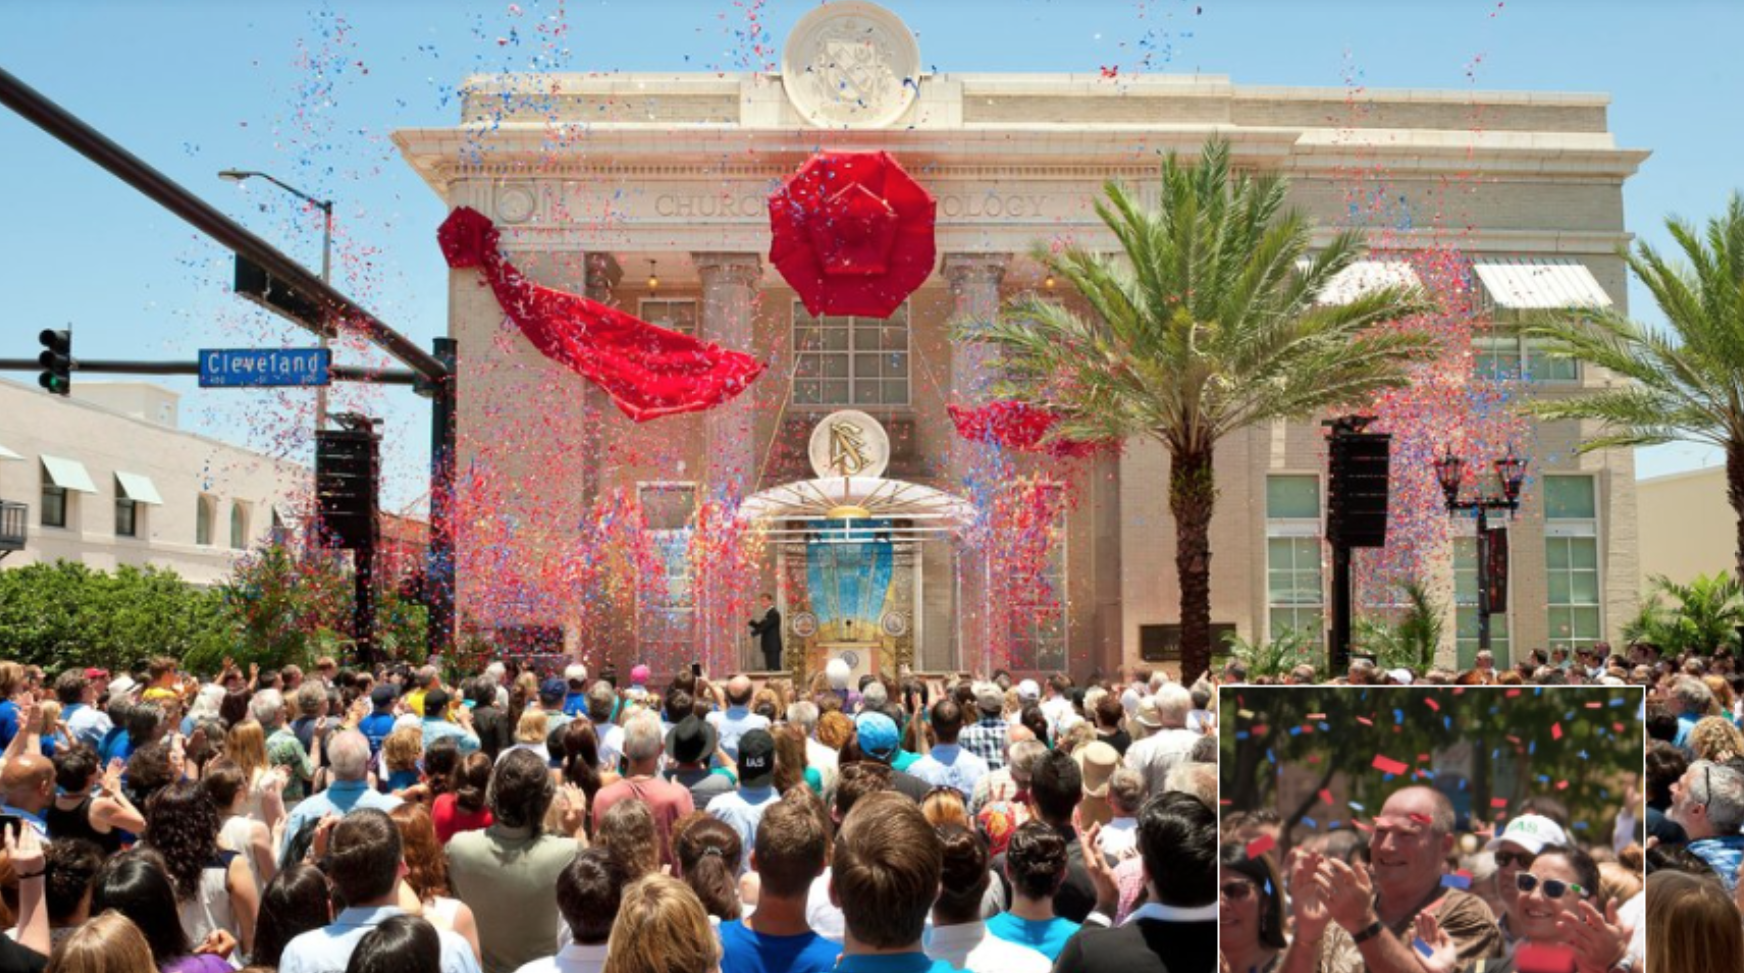 confetti cannona for Scientology in tampa